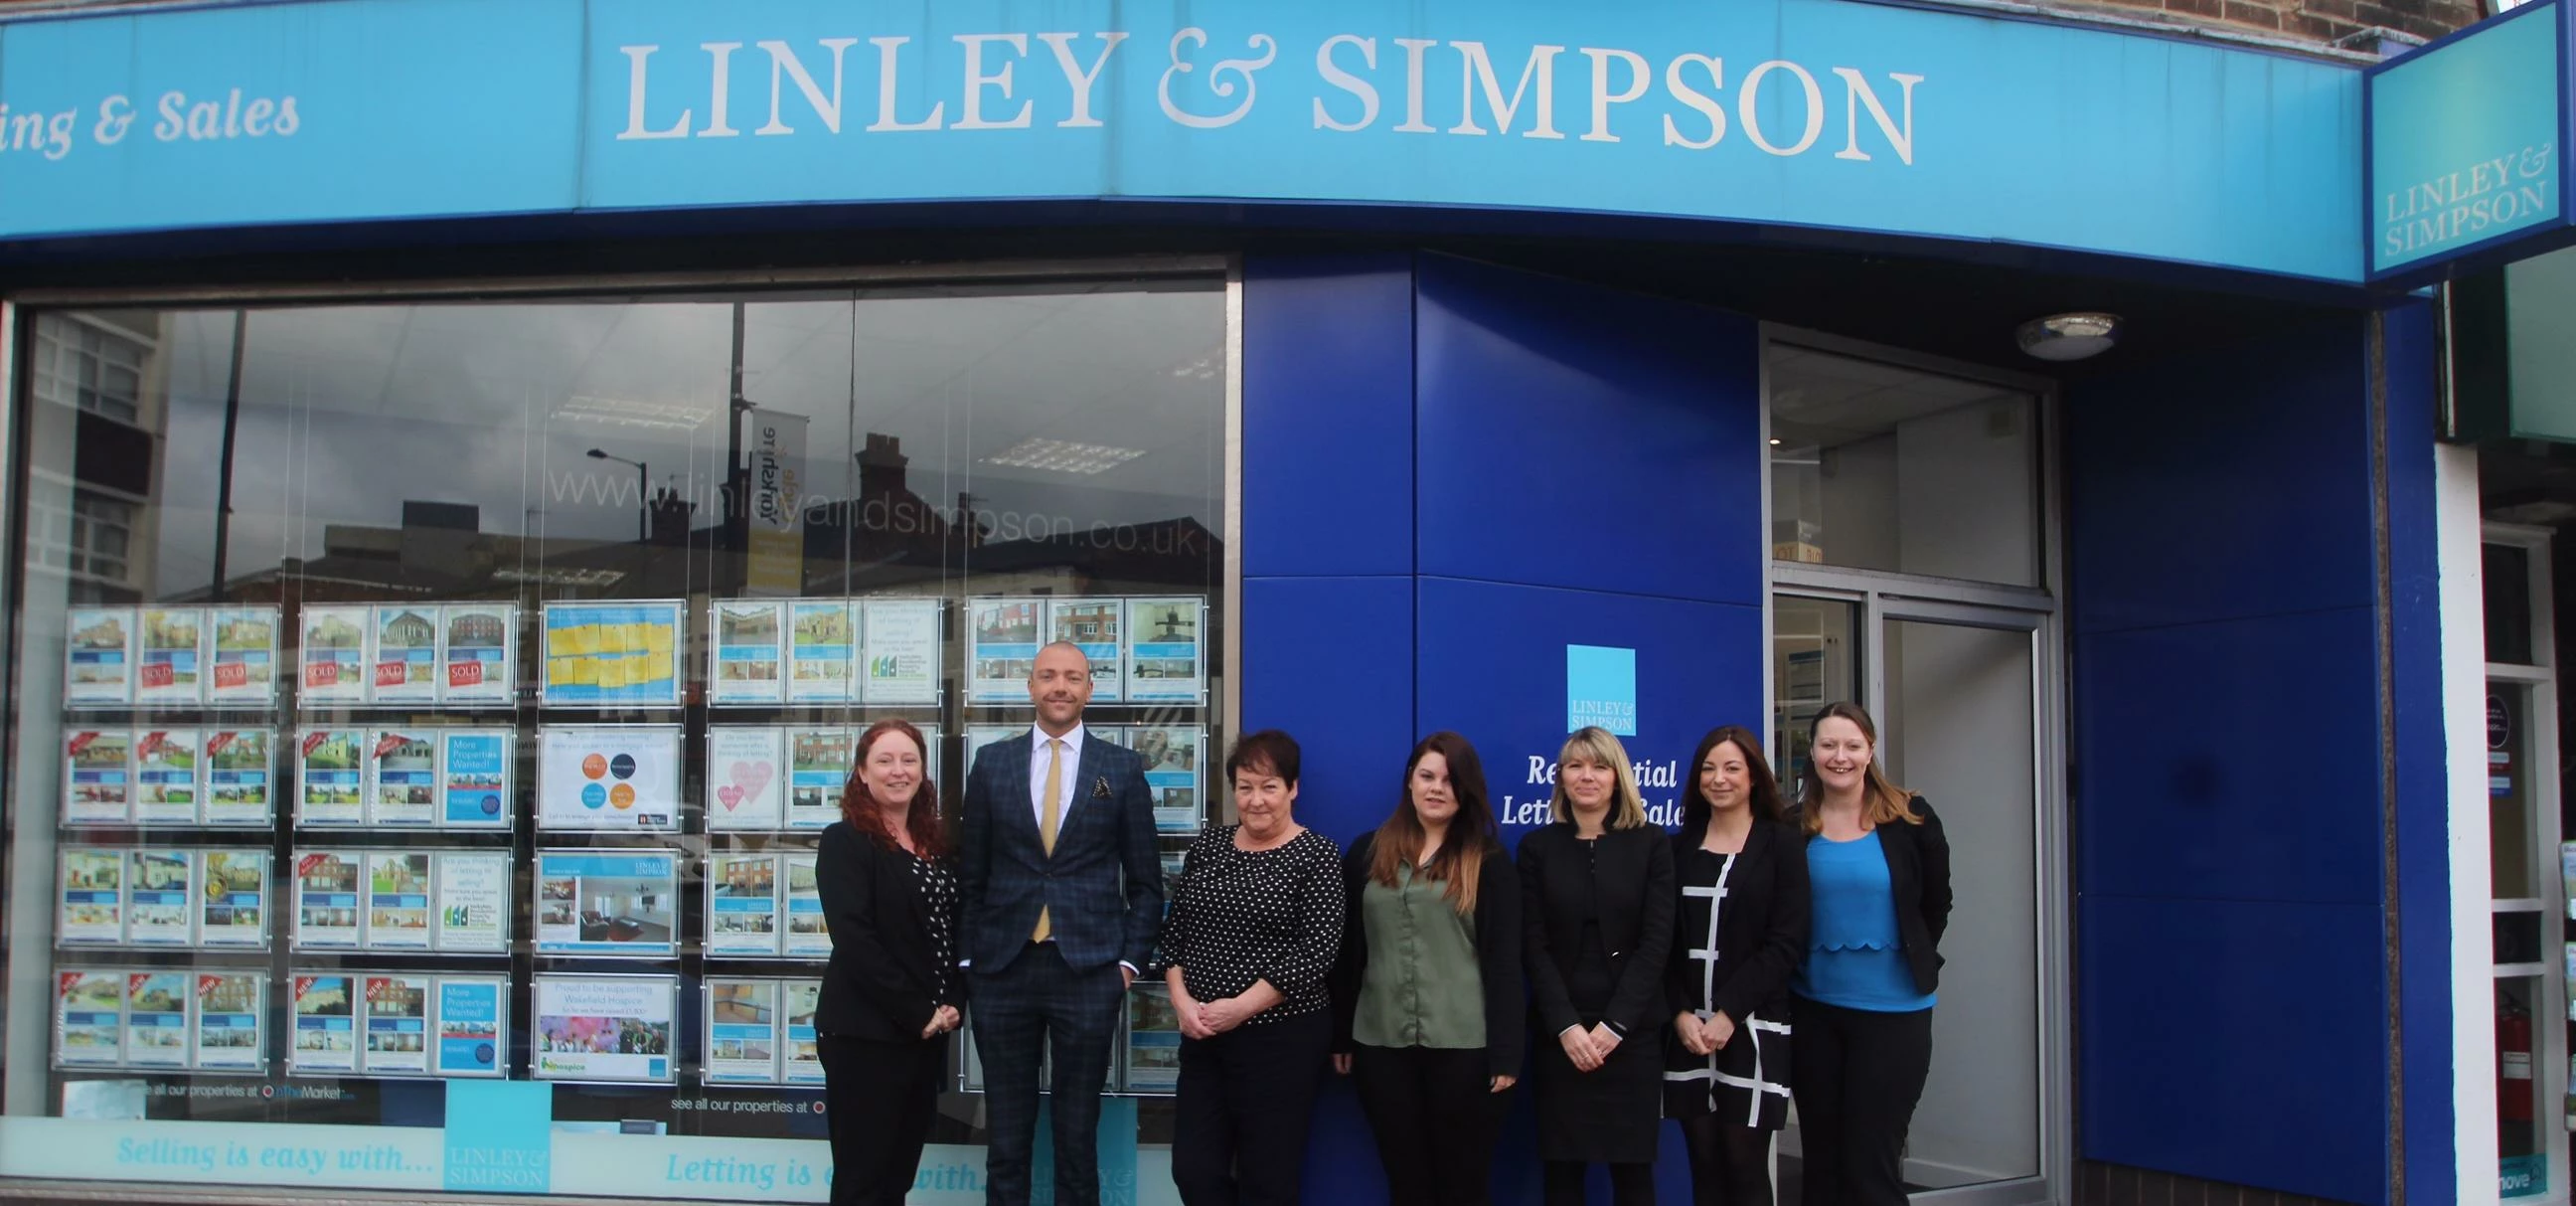 Wakefield's best ....Linley & Simpson will represent the Merrie City in the British Property Awards